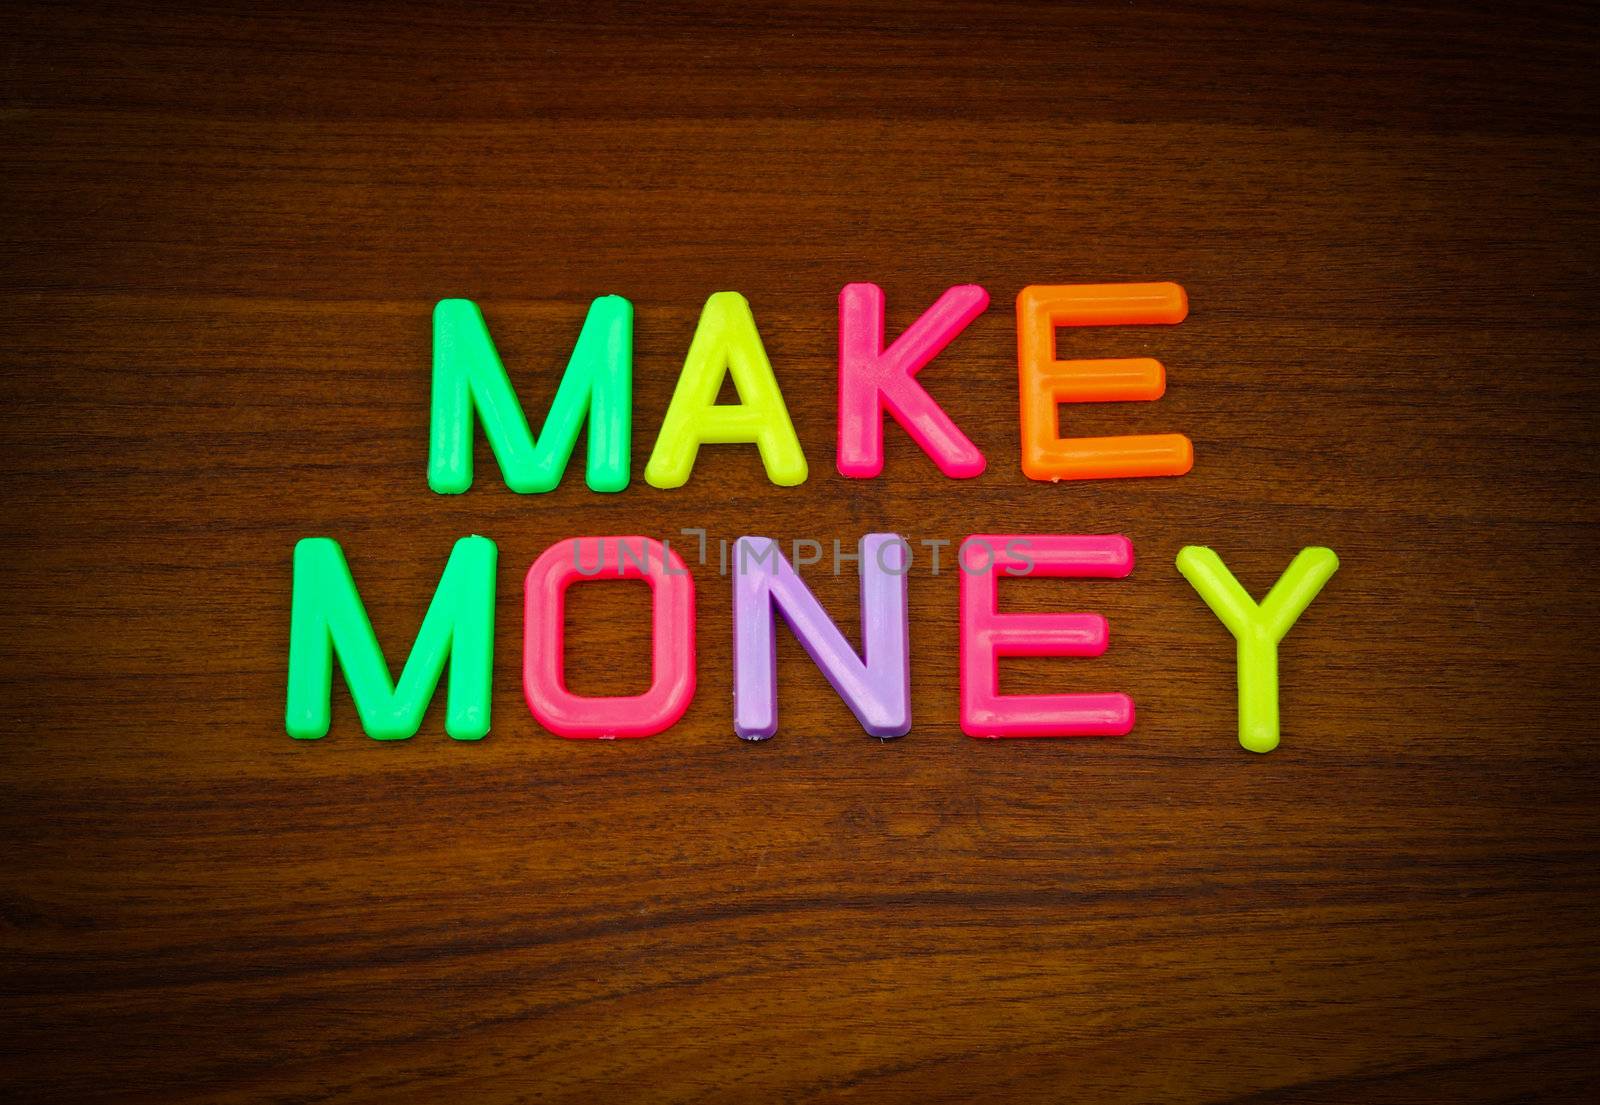 Make money in colorful toy letters on wood background